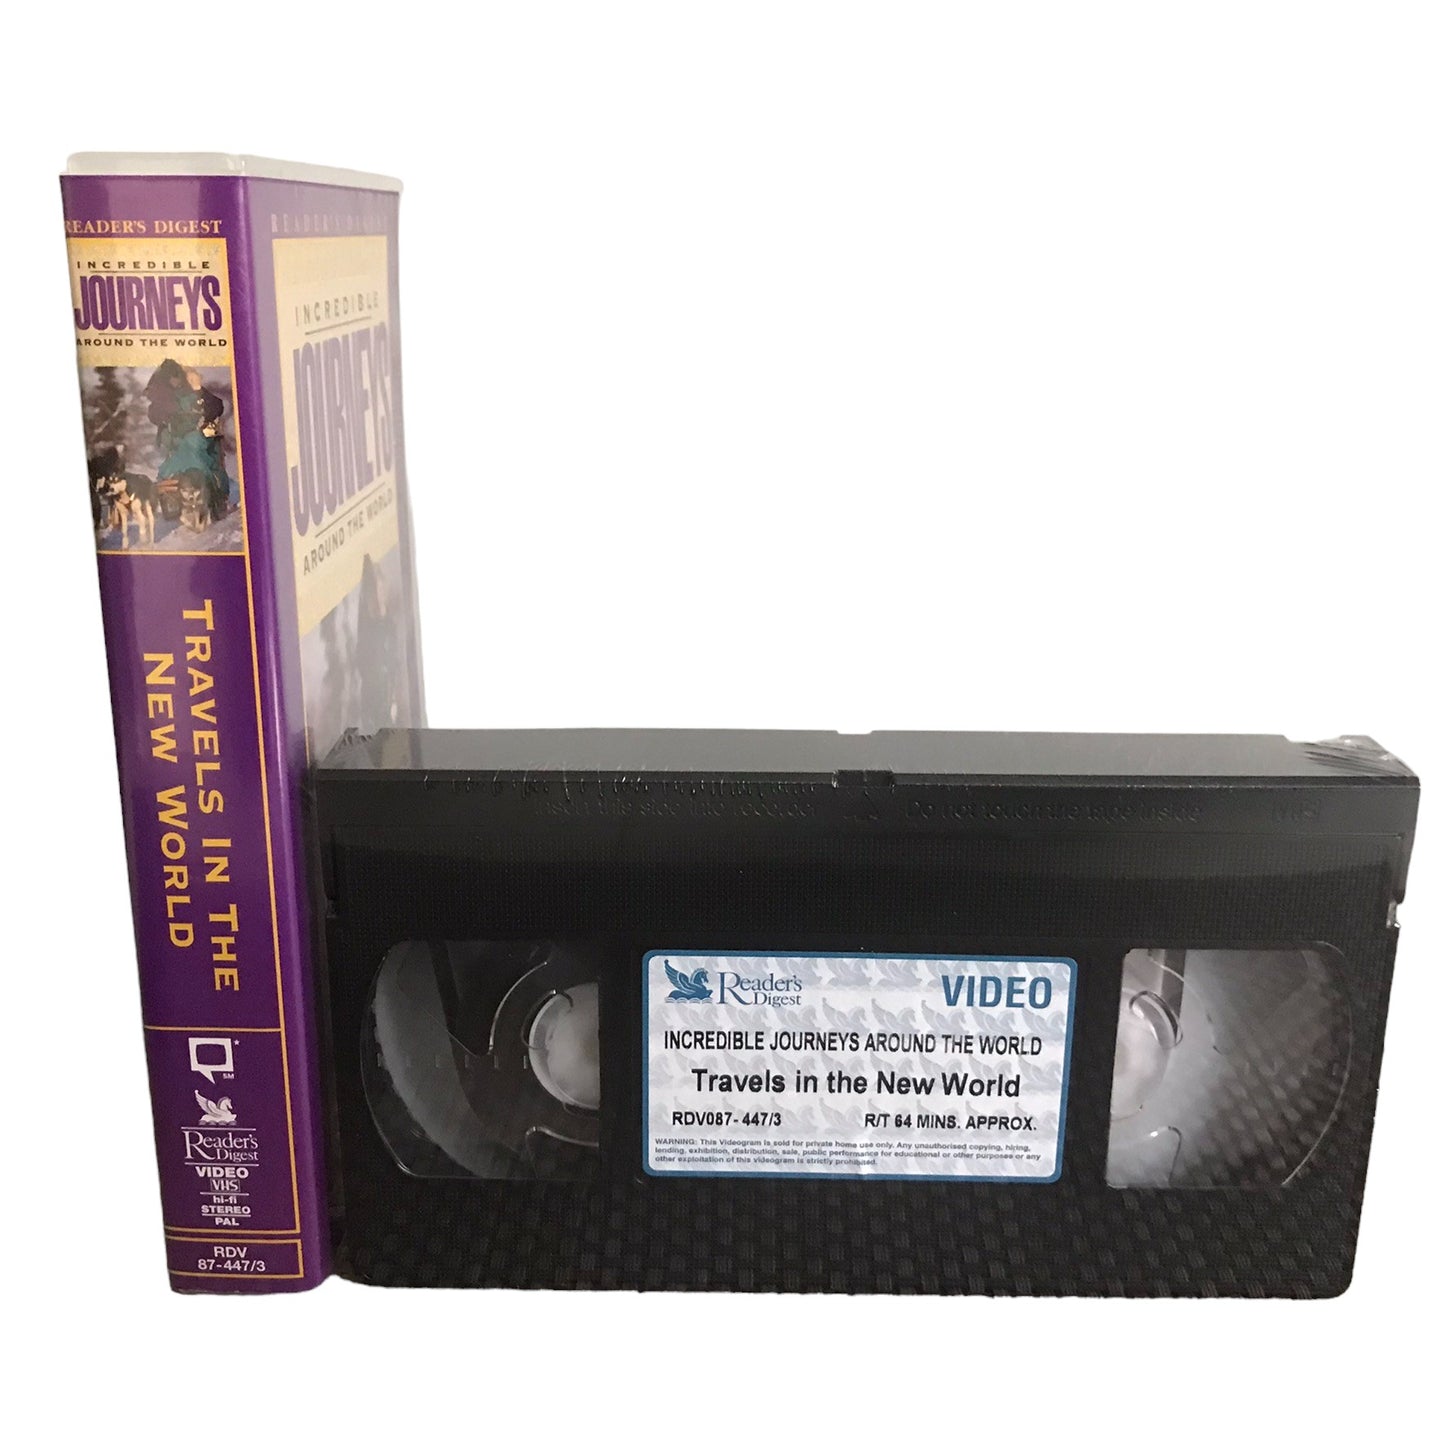 Incredible Journey Around The World - Travels in The new World - Reader's Digest - Drama - Pal - VHS-